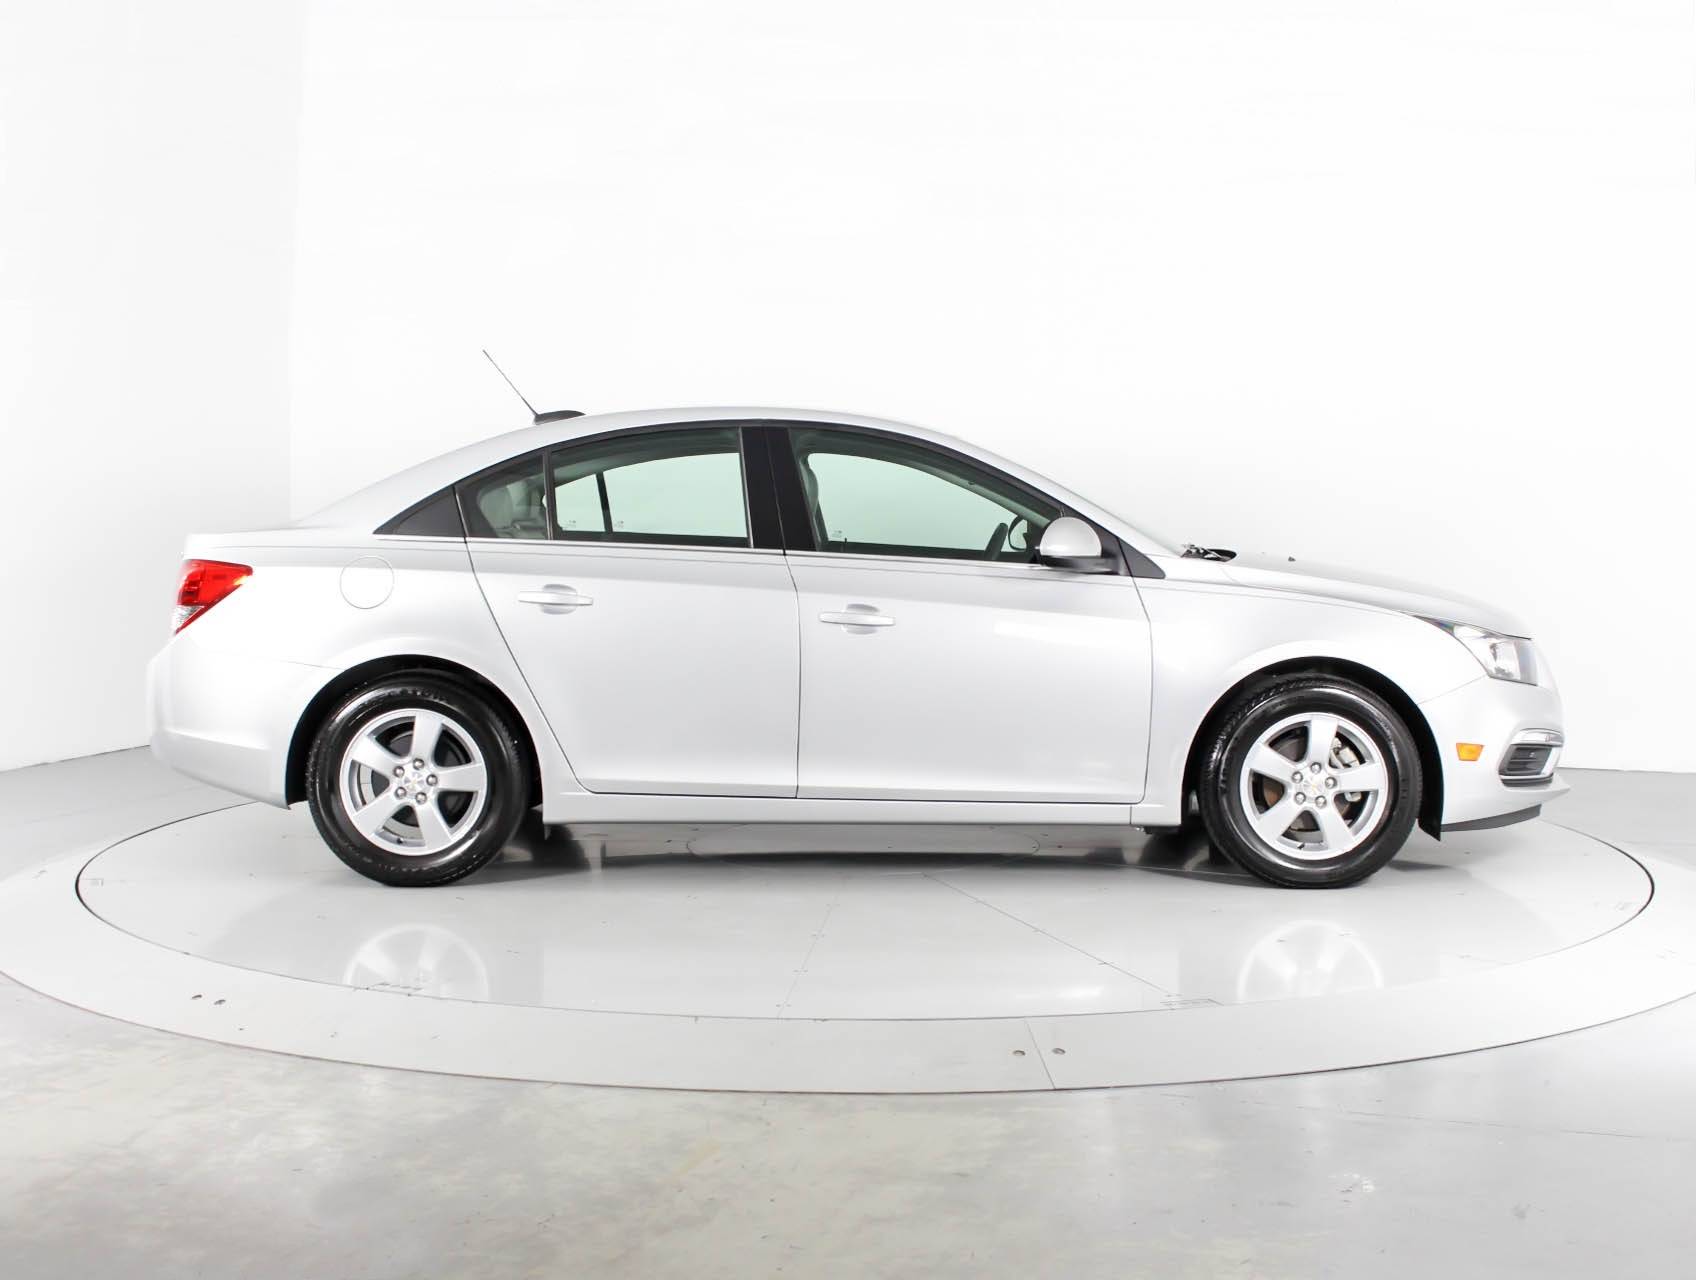 Florida Fine Cars - Used CHEVROLET Cruze 2016 WEST PALM Limited 1lt